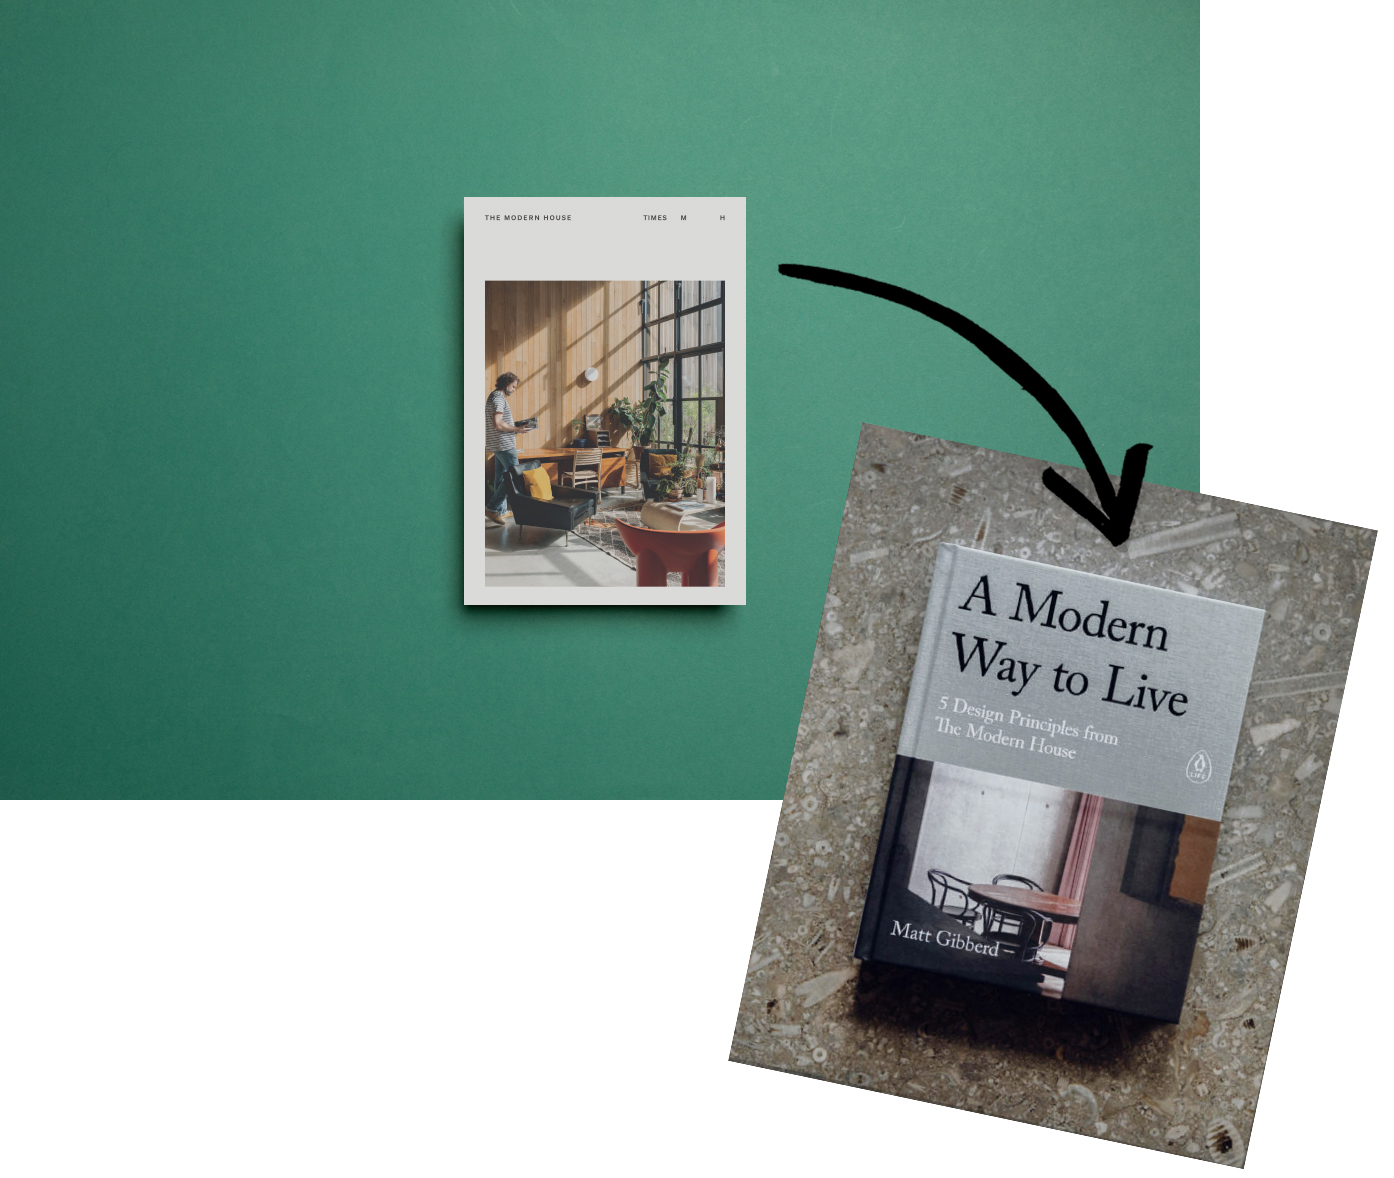 Newspaper Club gift guide: A Modern Way to Live by The Modern House